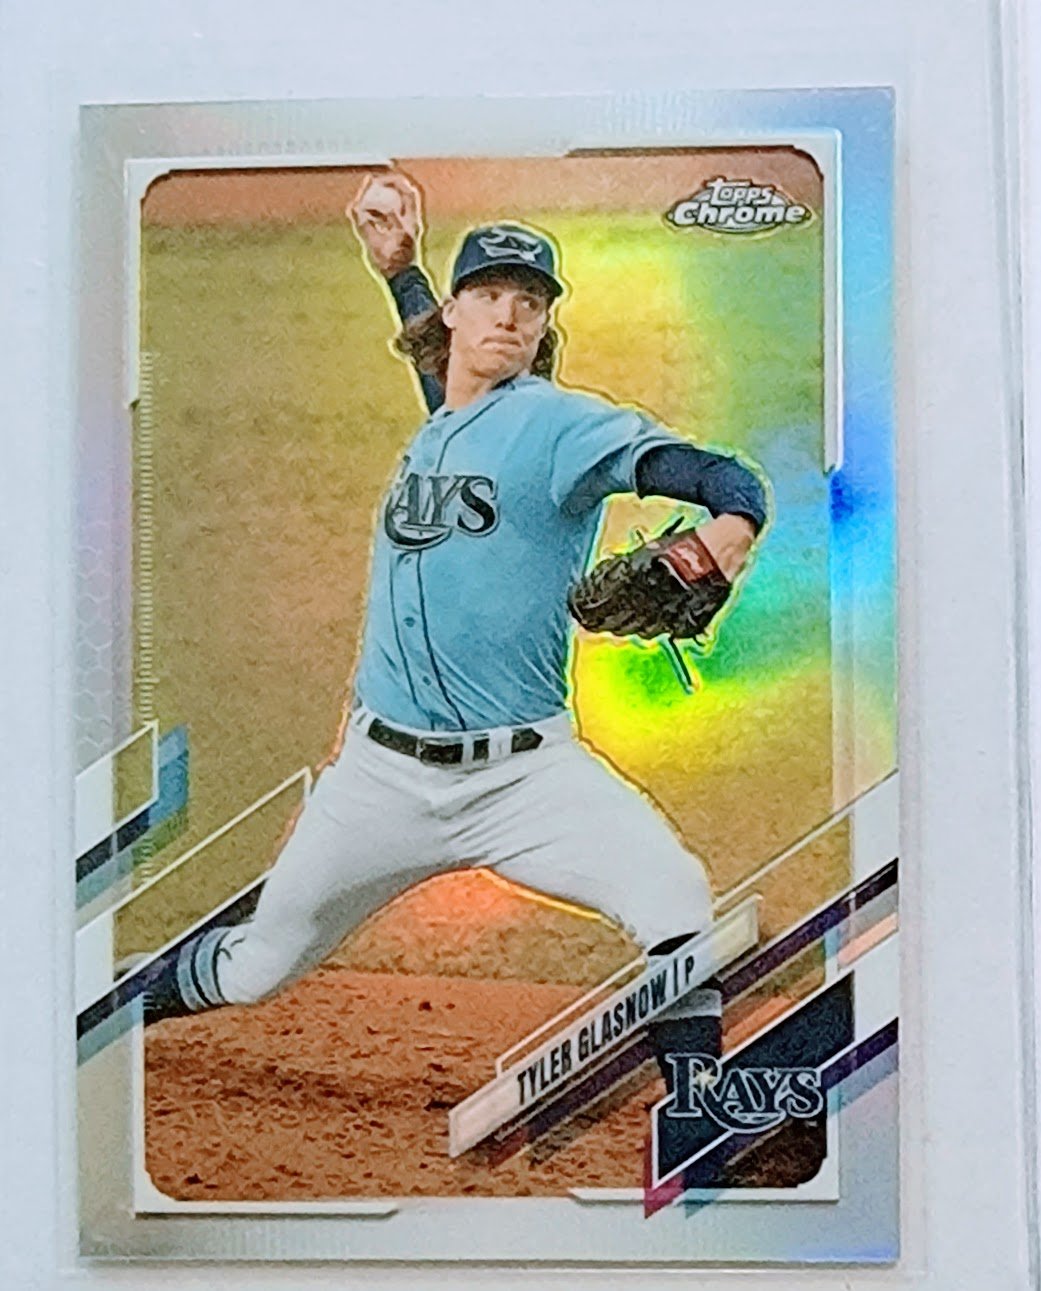 2021 Topps Chrome Tyler Glasnow Refractor Baseball Card TPTV simple Xclusive Collectibles   